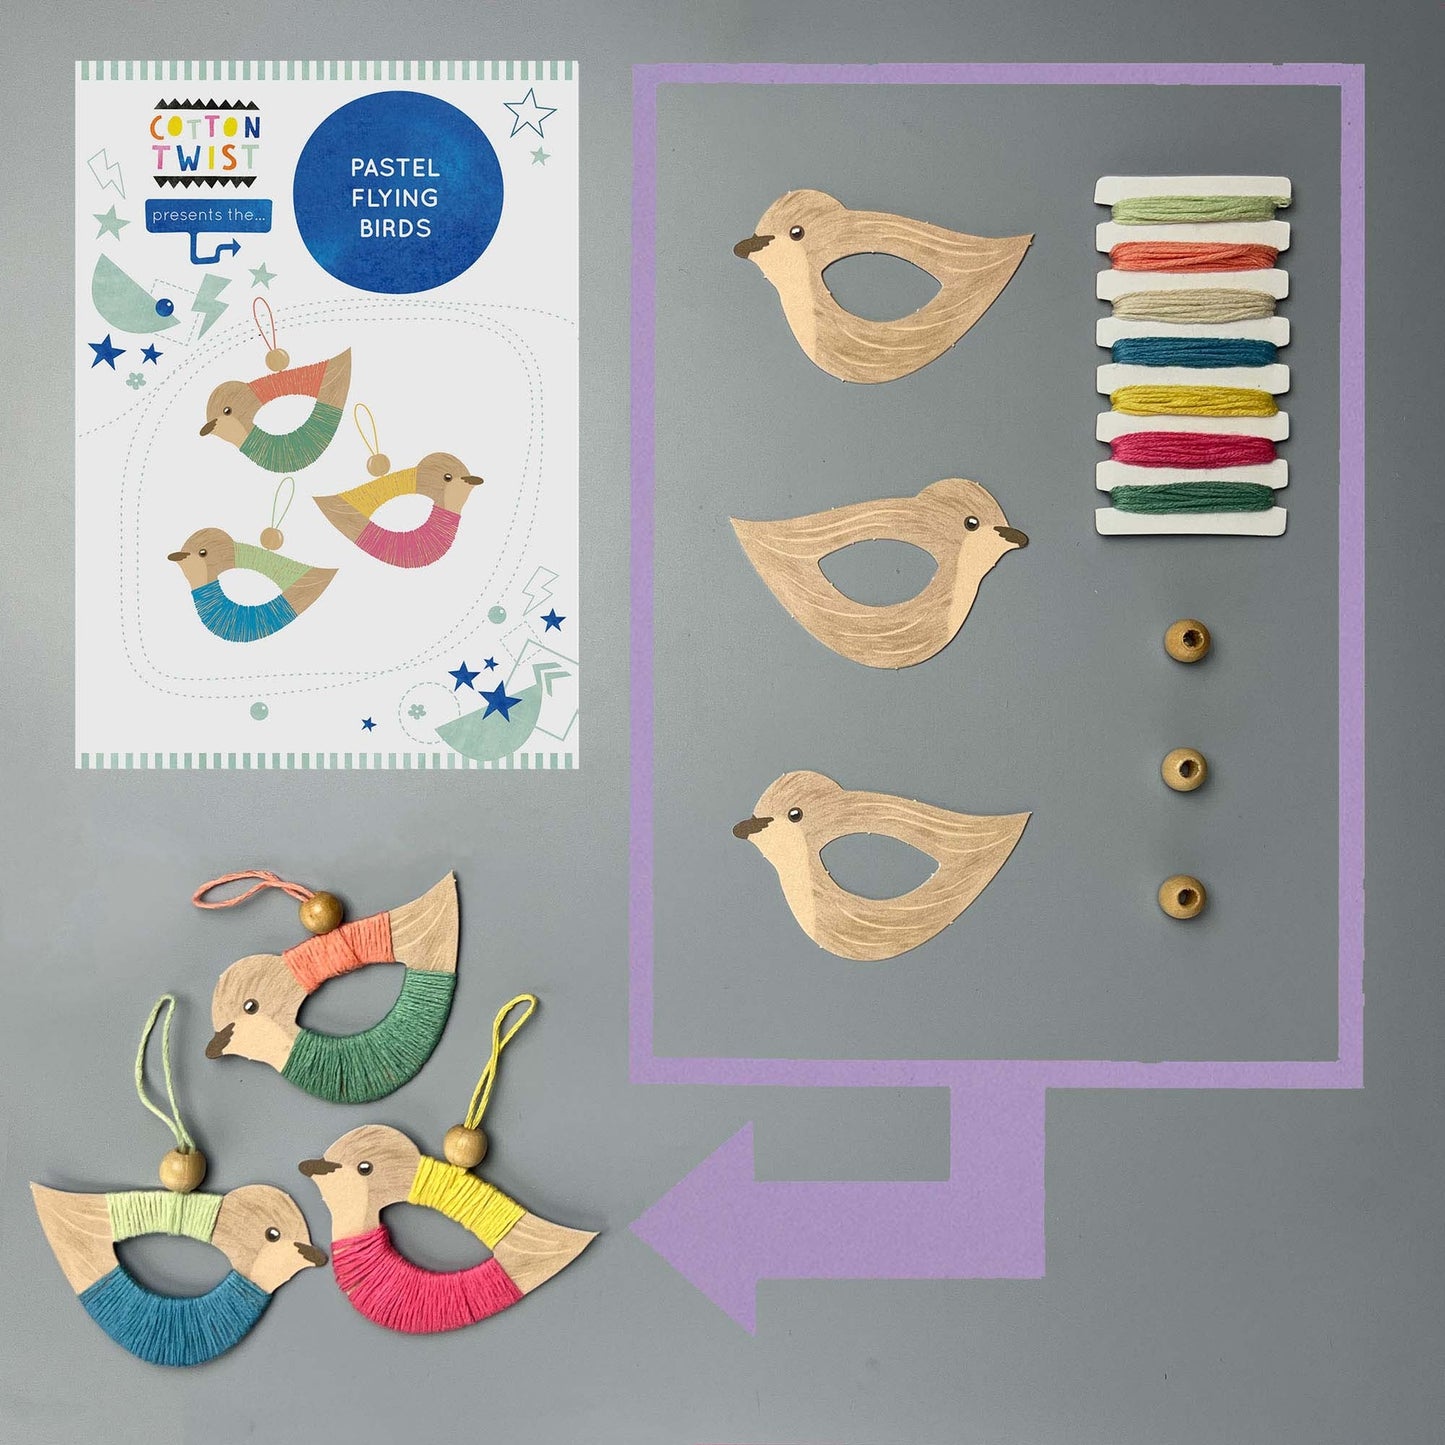 Make Your Own Flying Bird Decorations